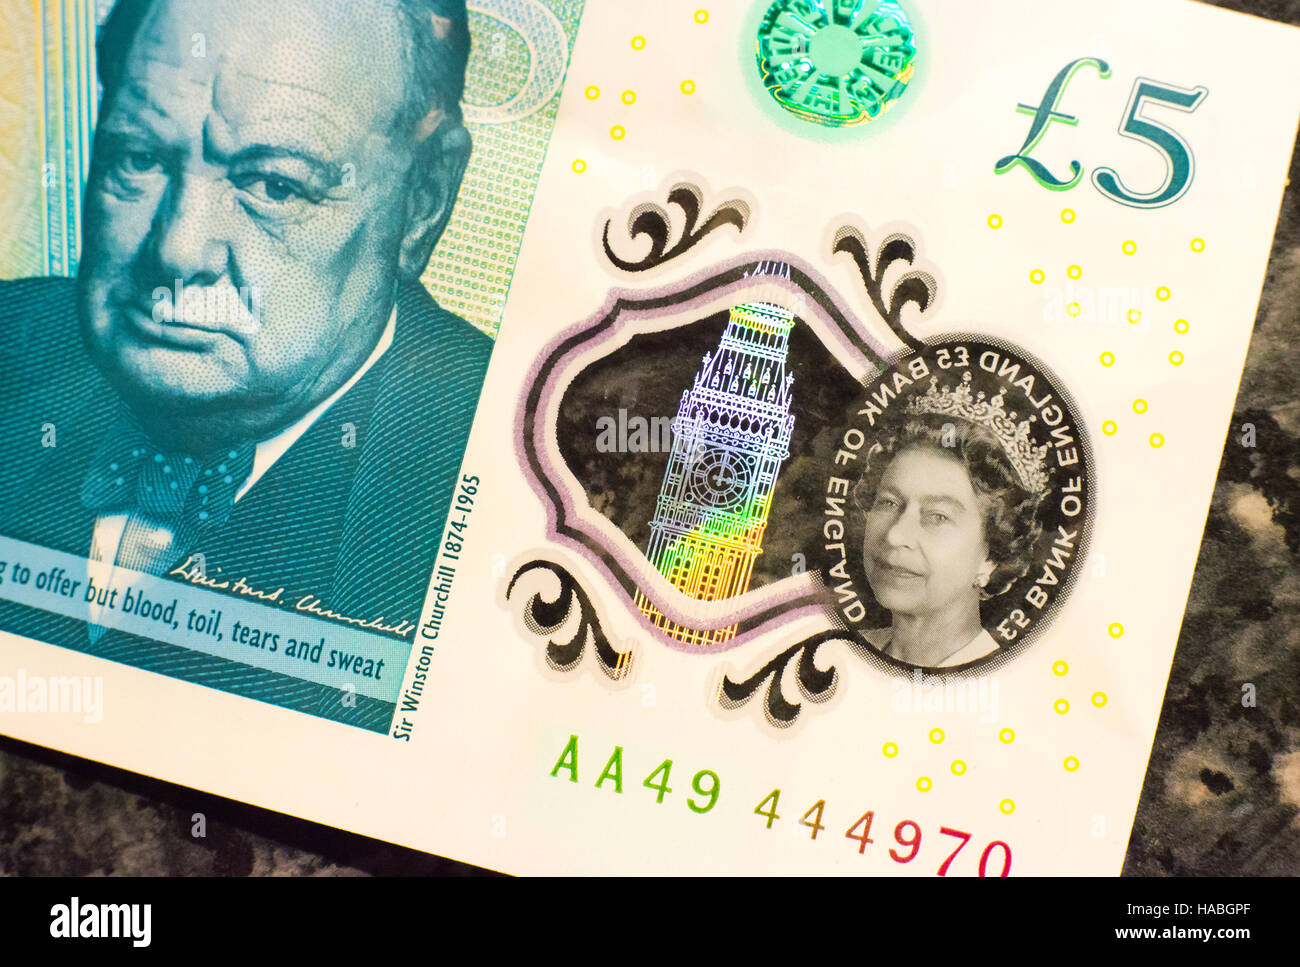 29th November 2016, UK. The new five pound note, or fiver, contains tallow, an animal product, the Bank of England has acknowledged. Vegans, vegetarians and Hindus could take offence at the substance being used. The plastic note has been generally well received by the public for its resilience. Stock Photo